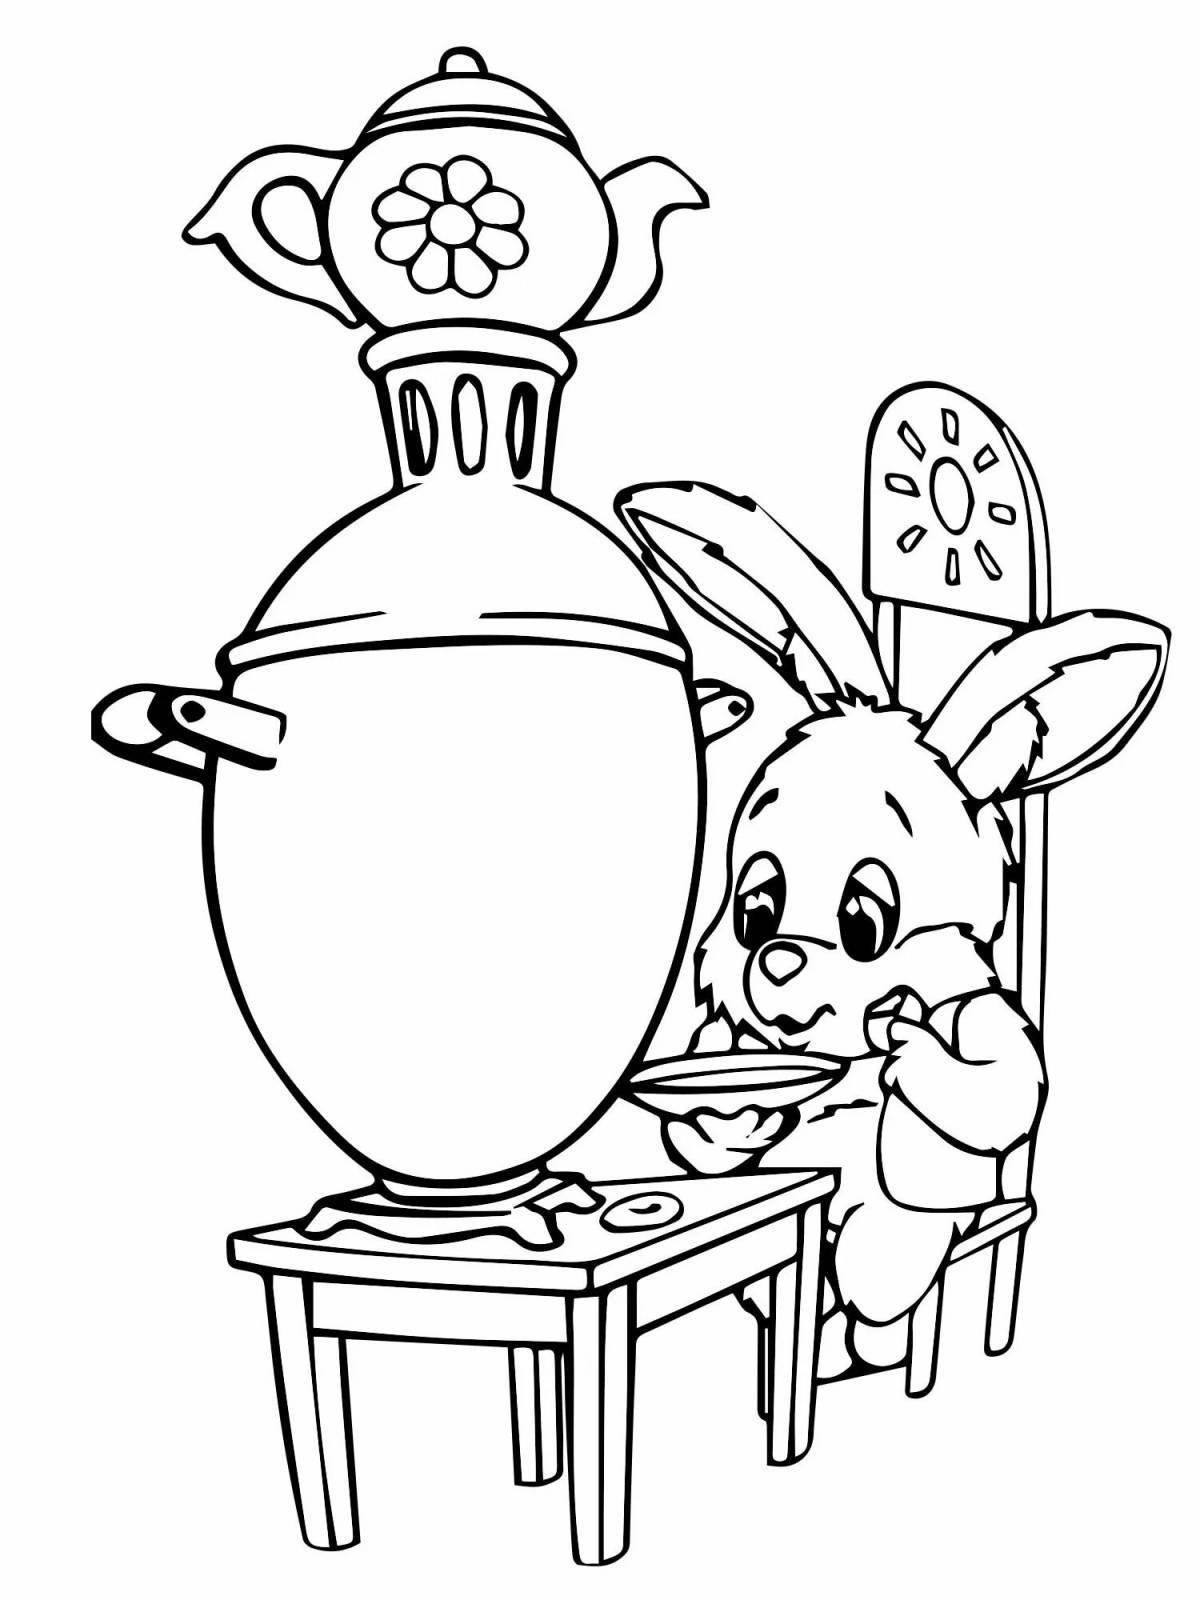 Bright drawing of a samovar for children